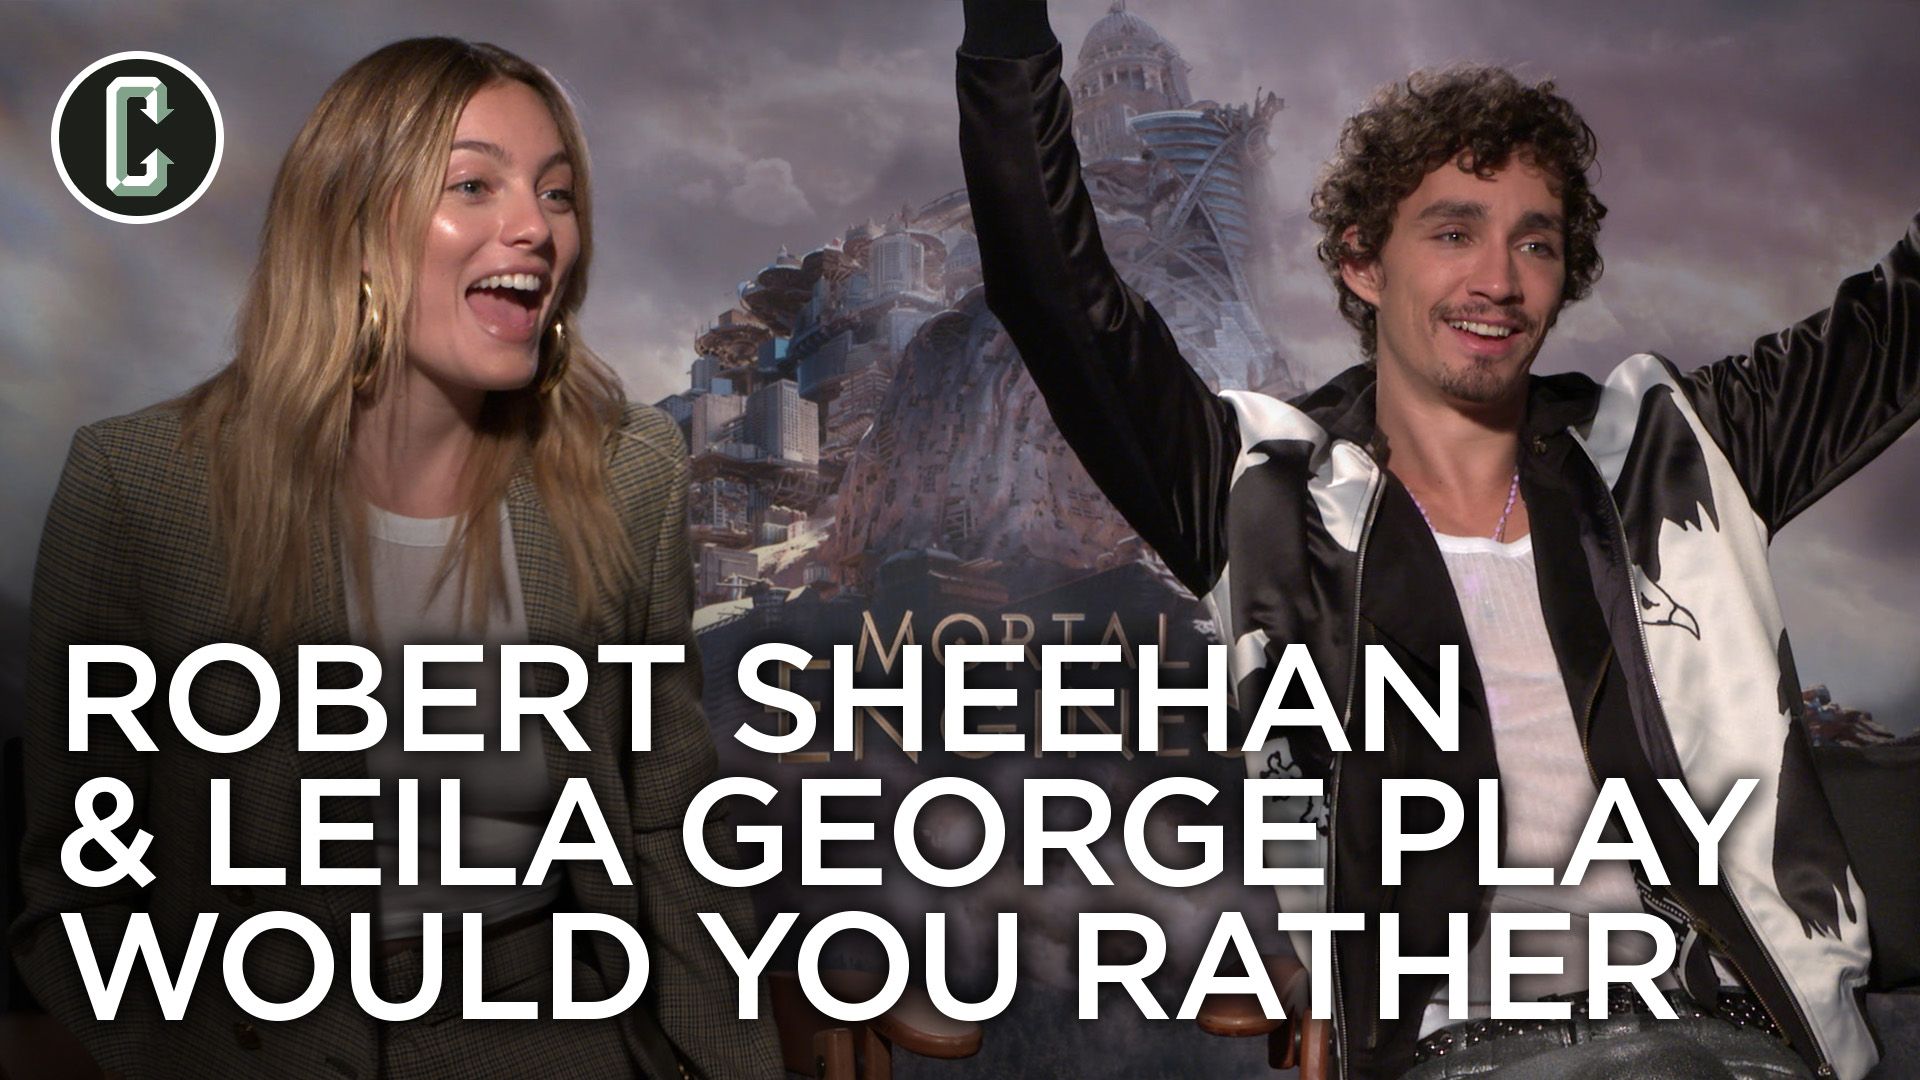 Mortal Engines: Robert Sheehan & Leila George Play Would You Rather | Collider1920 x 1080